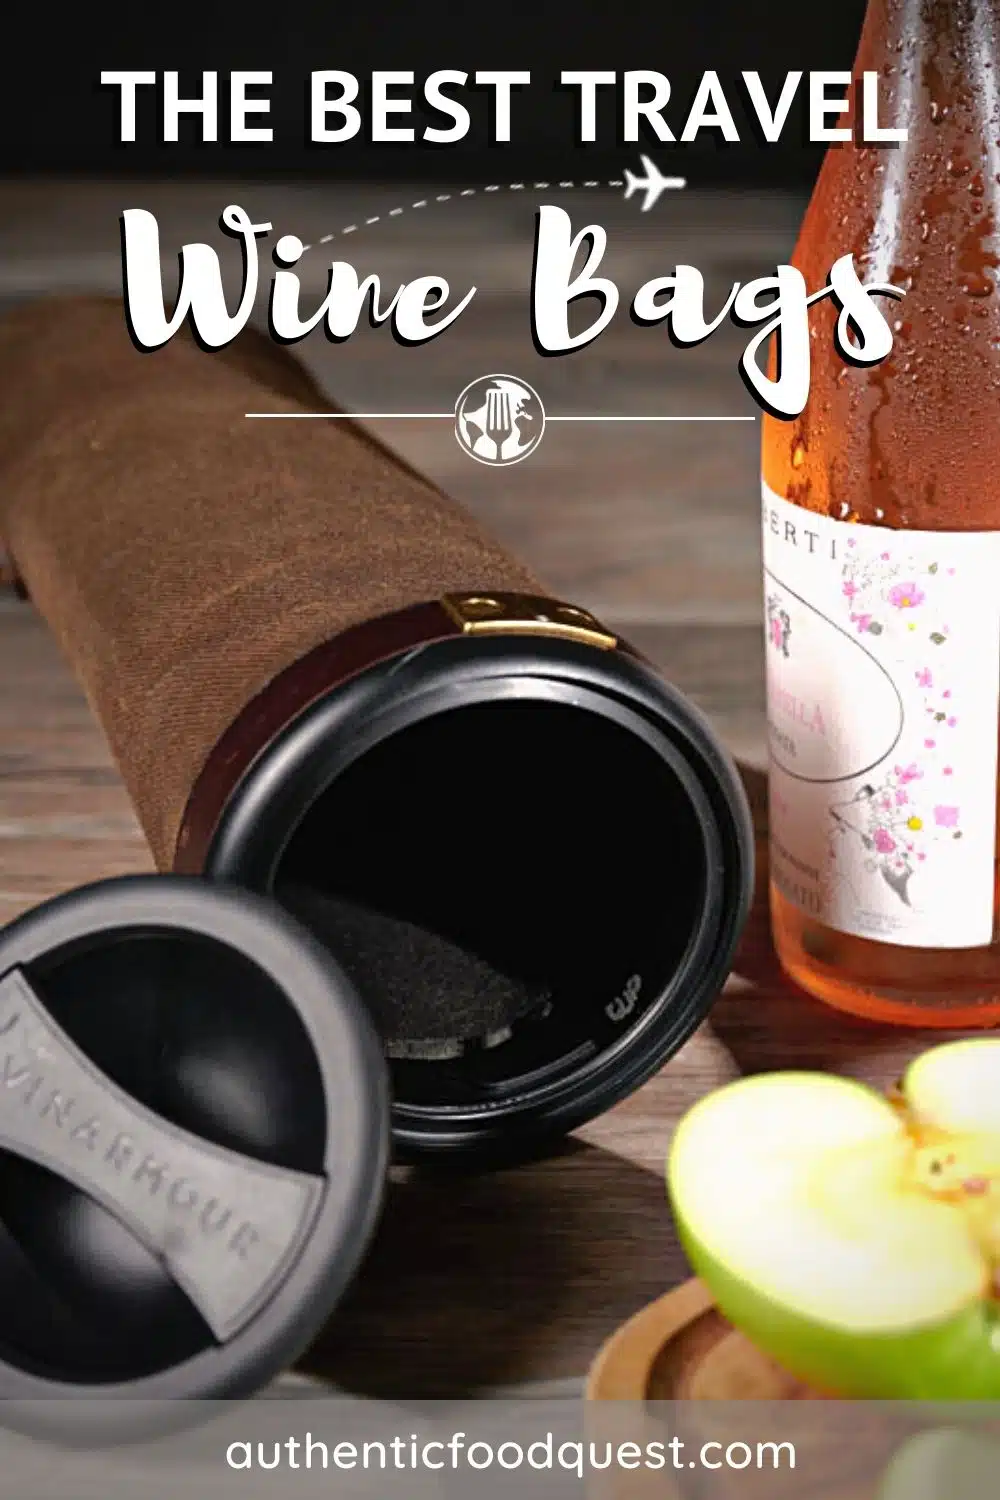  ALLCAMP 9 Piece Wine Travel Bag and Insulated Wine Carrier Tote  Carrying Cooler Bag with Handle,Great Gift for Wine Lover,: Home & Kitchen